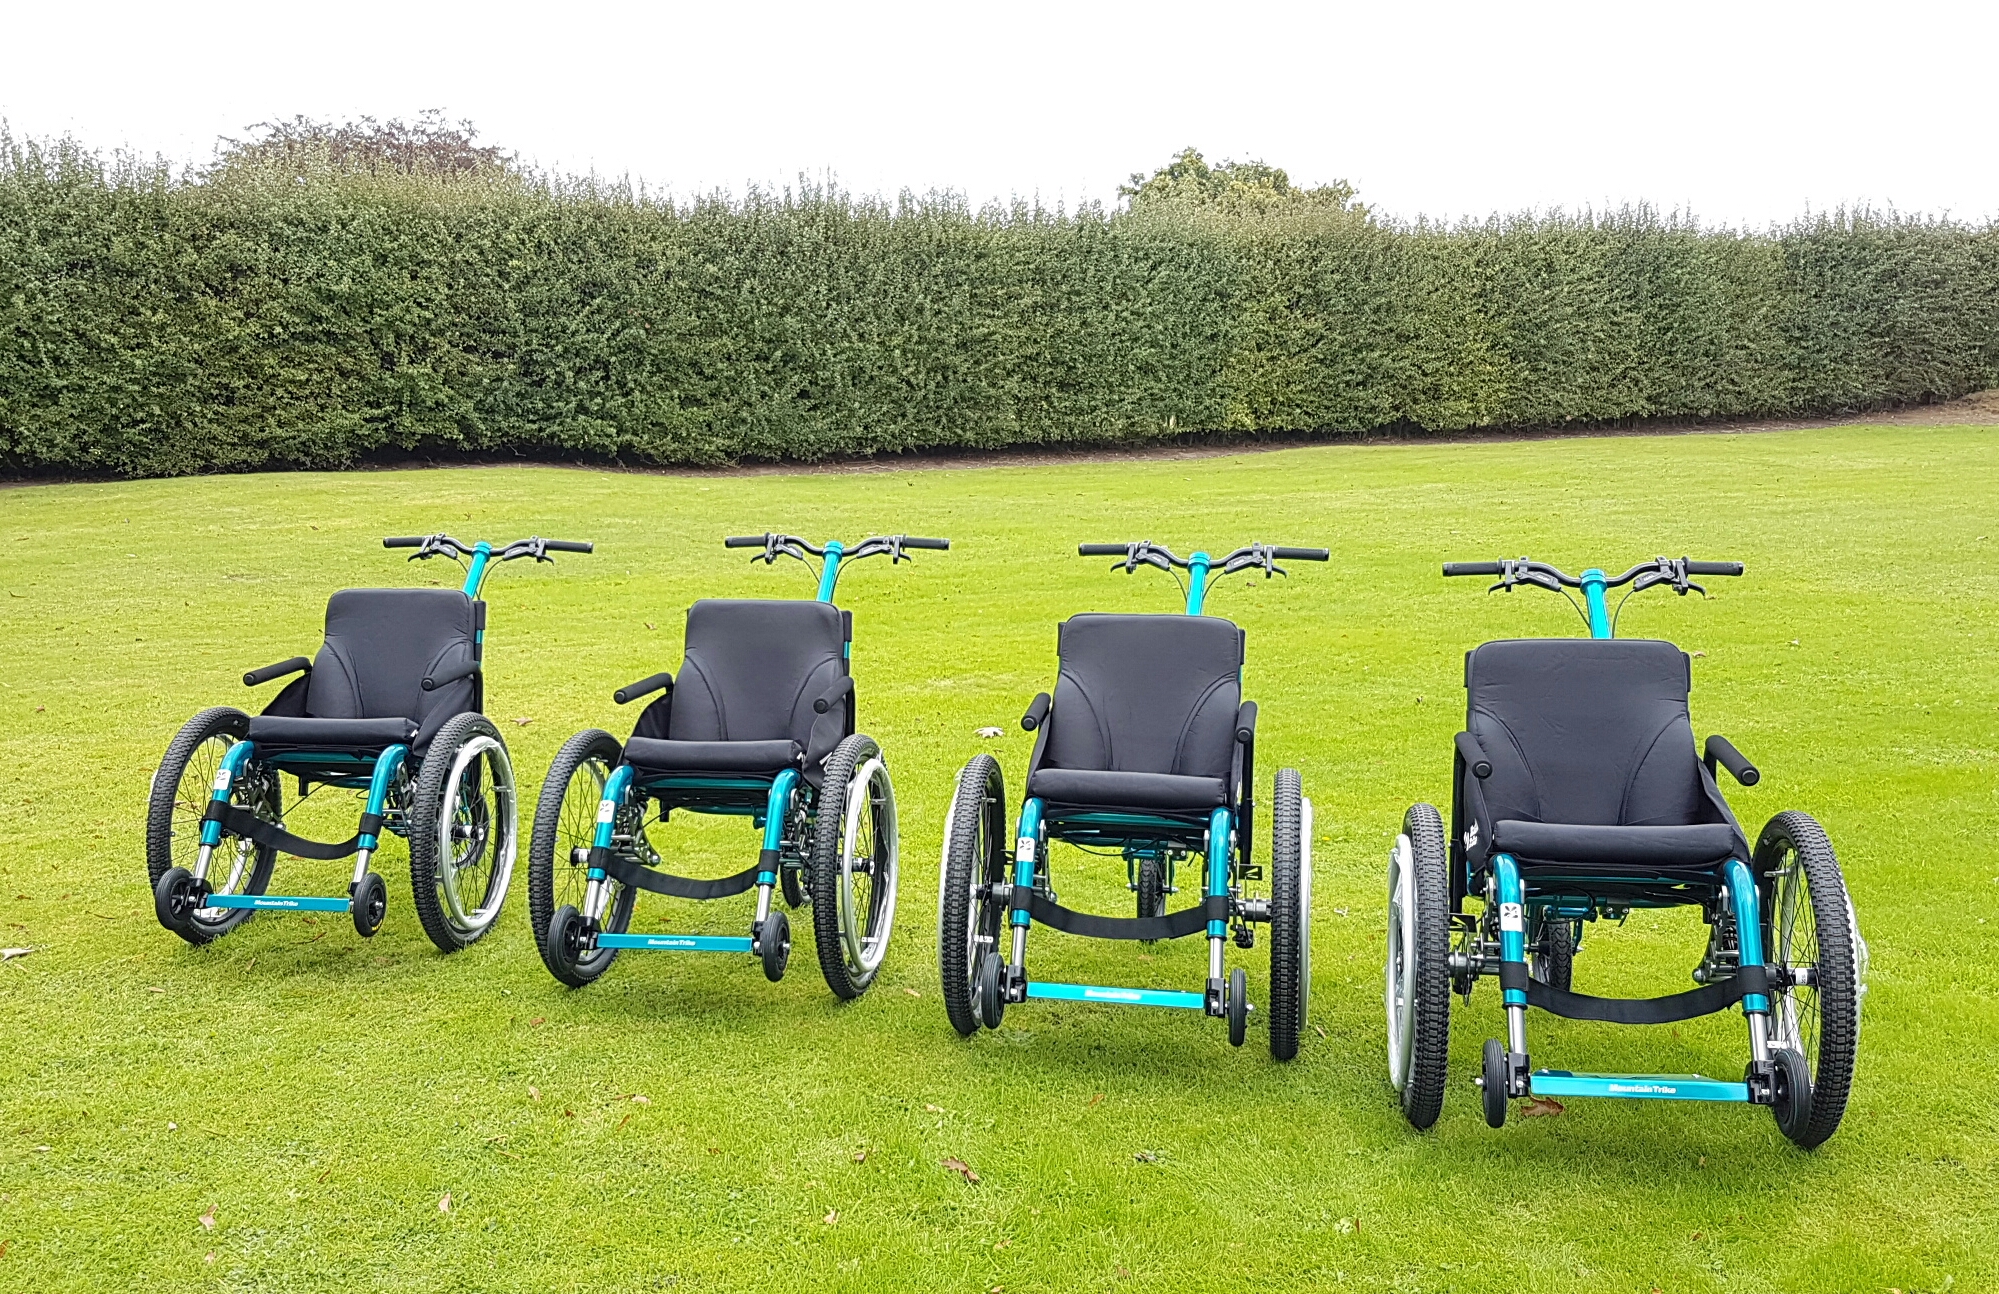 Enjoy National Trust days out with the MT Push all-terrain wheelchair – for FREE